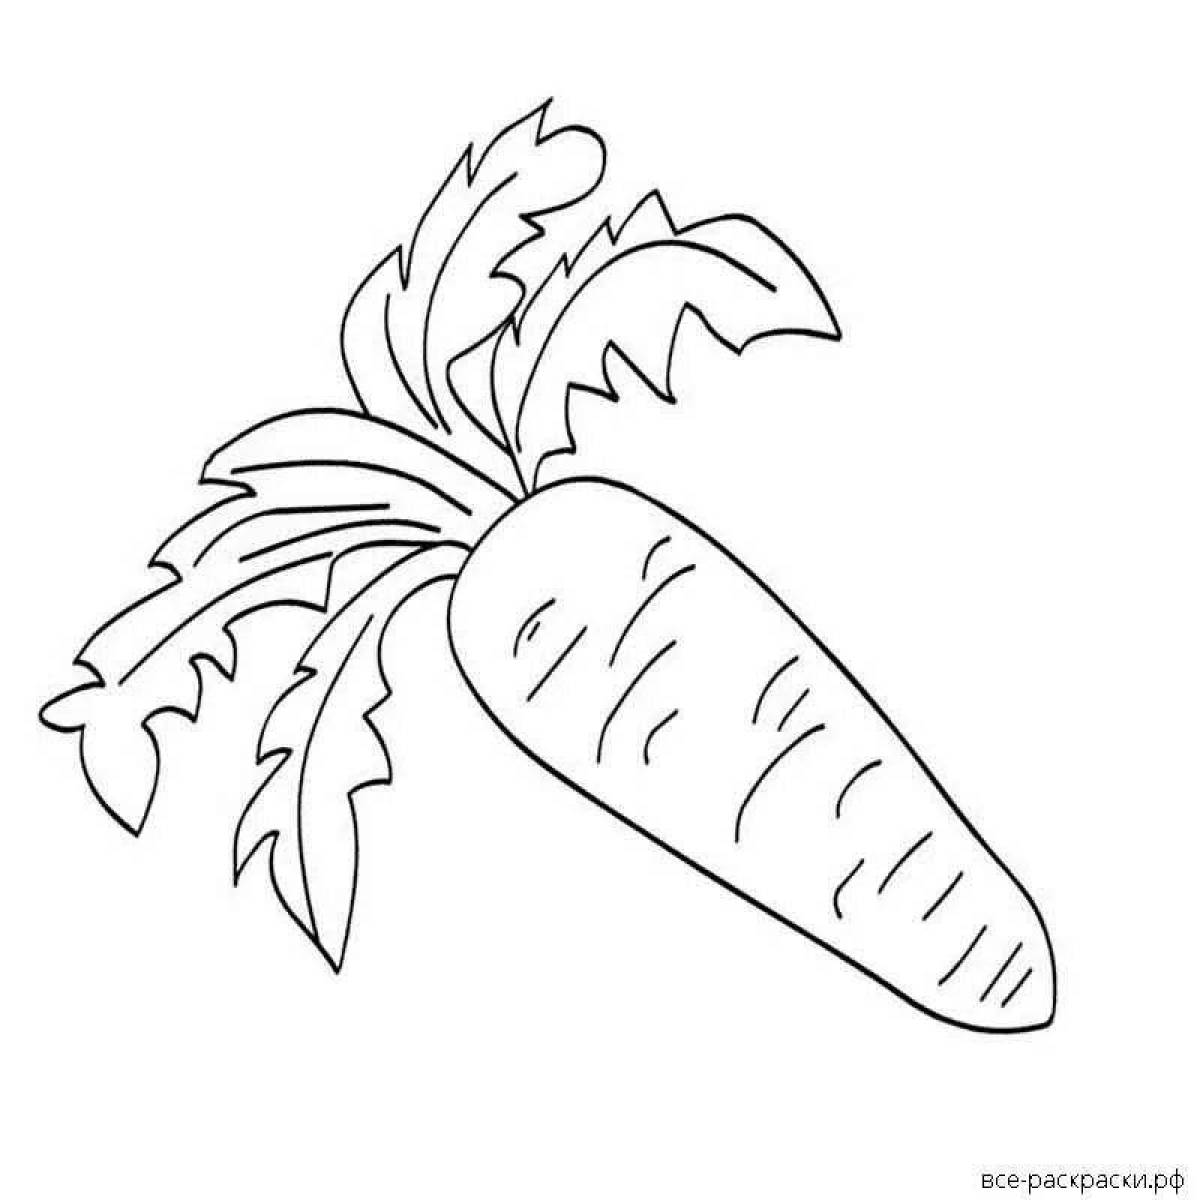 Adorable carrot coloring book for 3-4 year olds